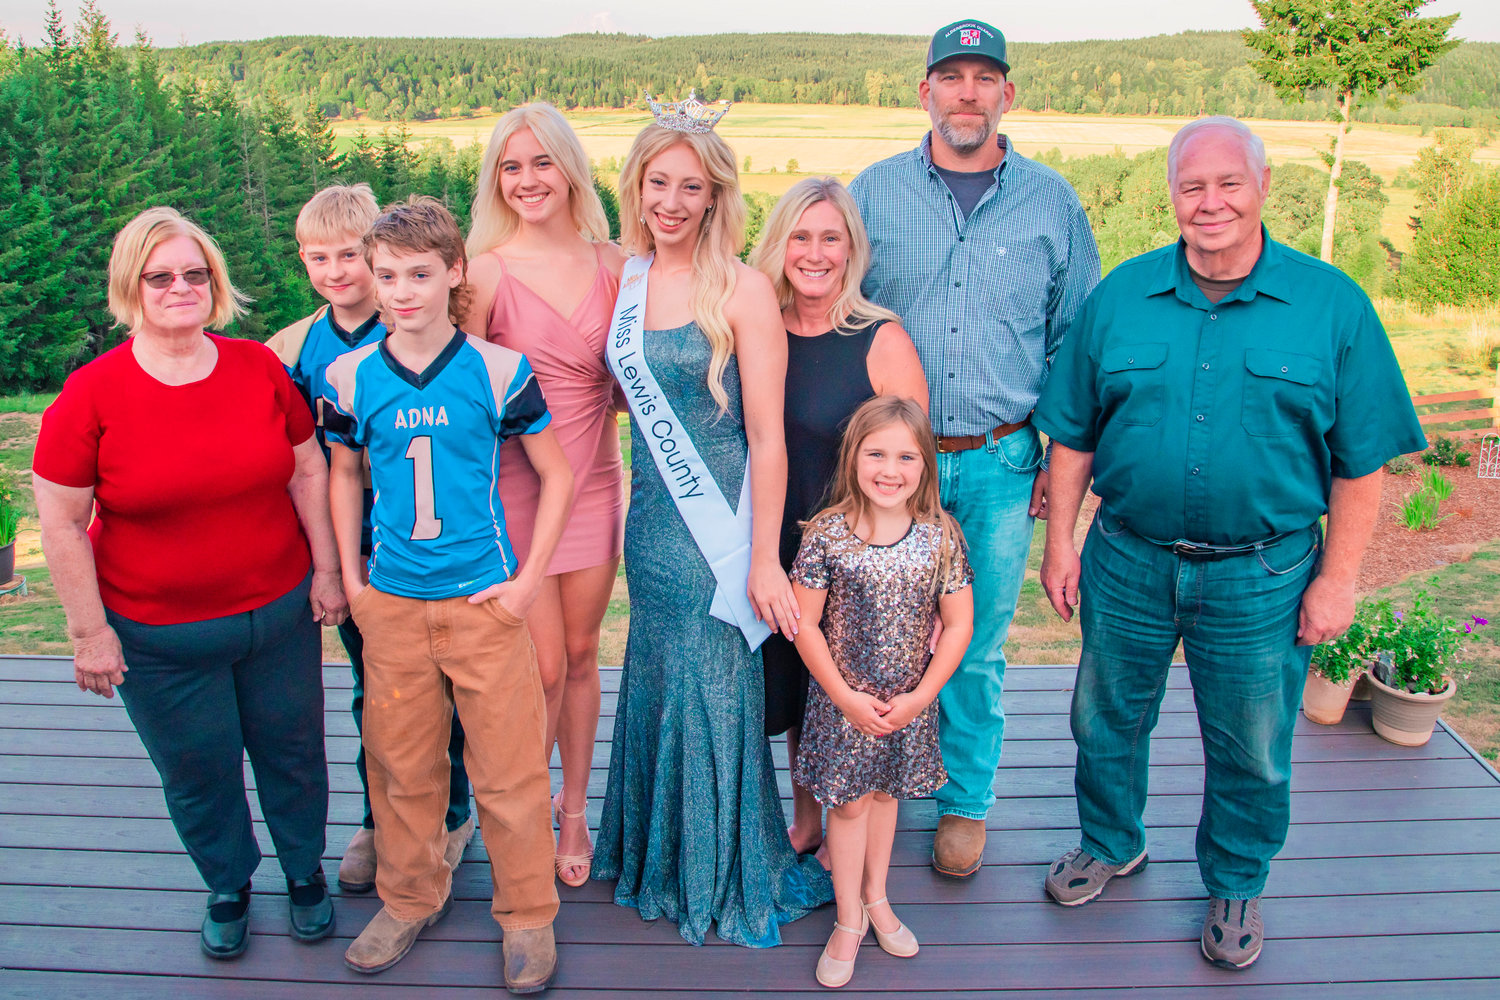 Sophie Moerke, crowned Miss Lewis County, poses for a photo with family following a ceremony in Chehalis on Monday.